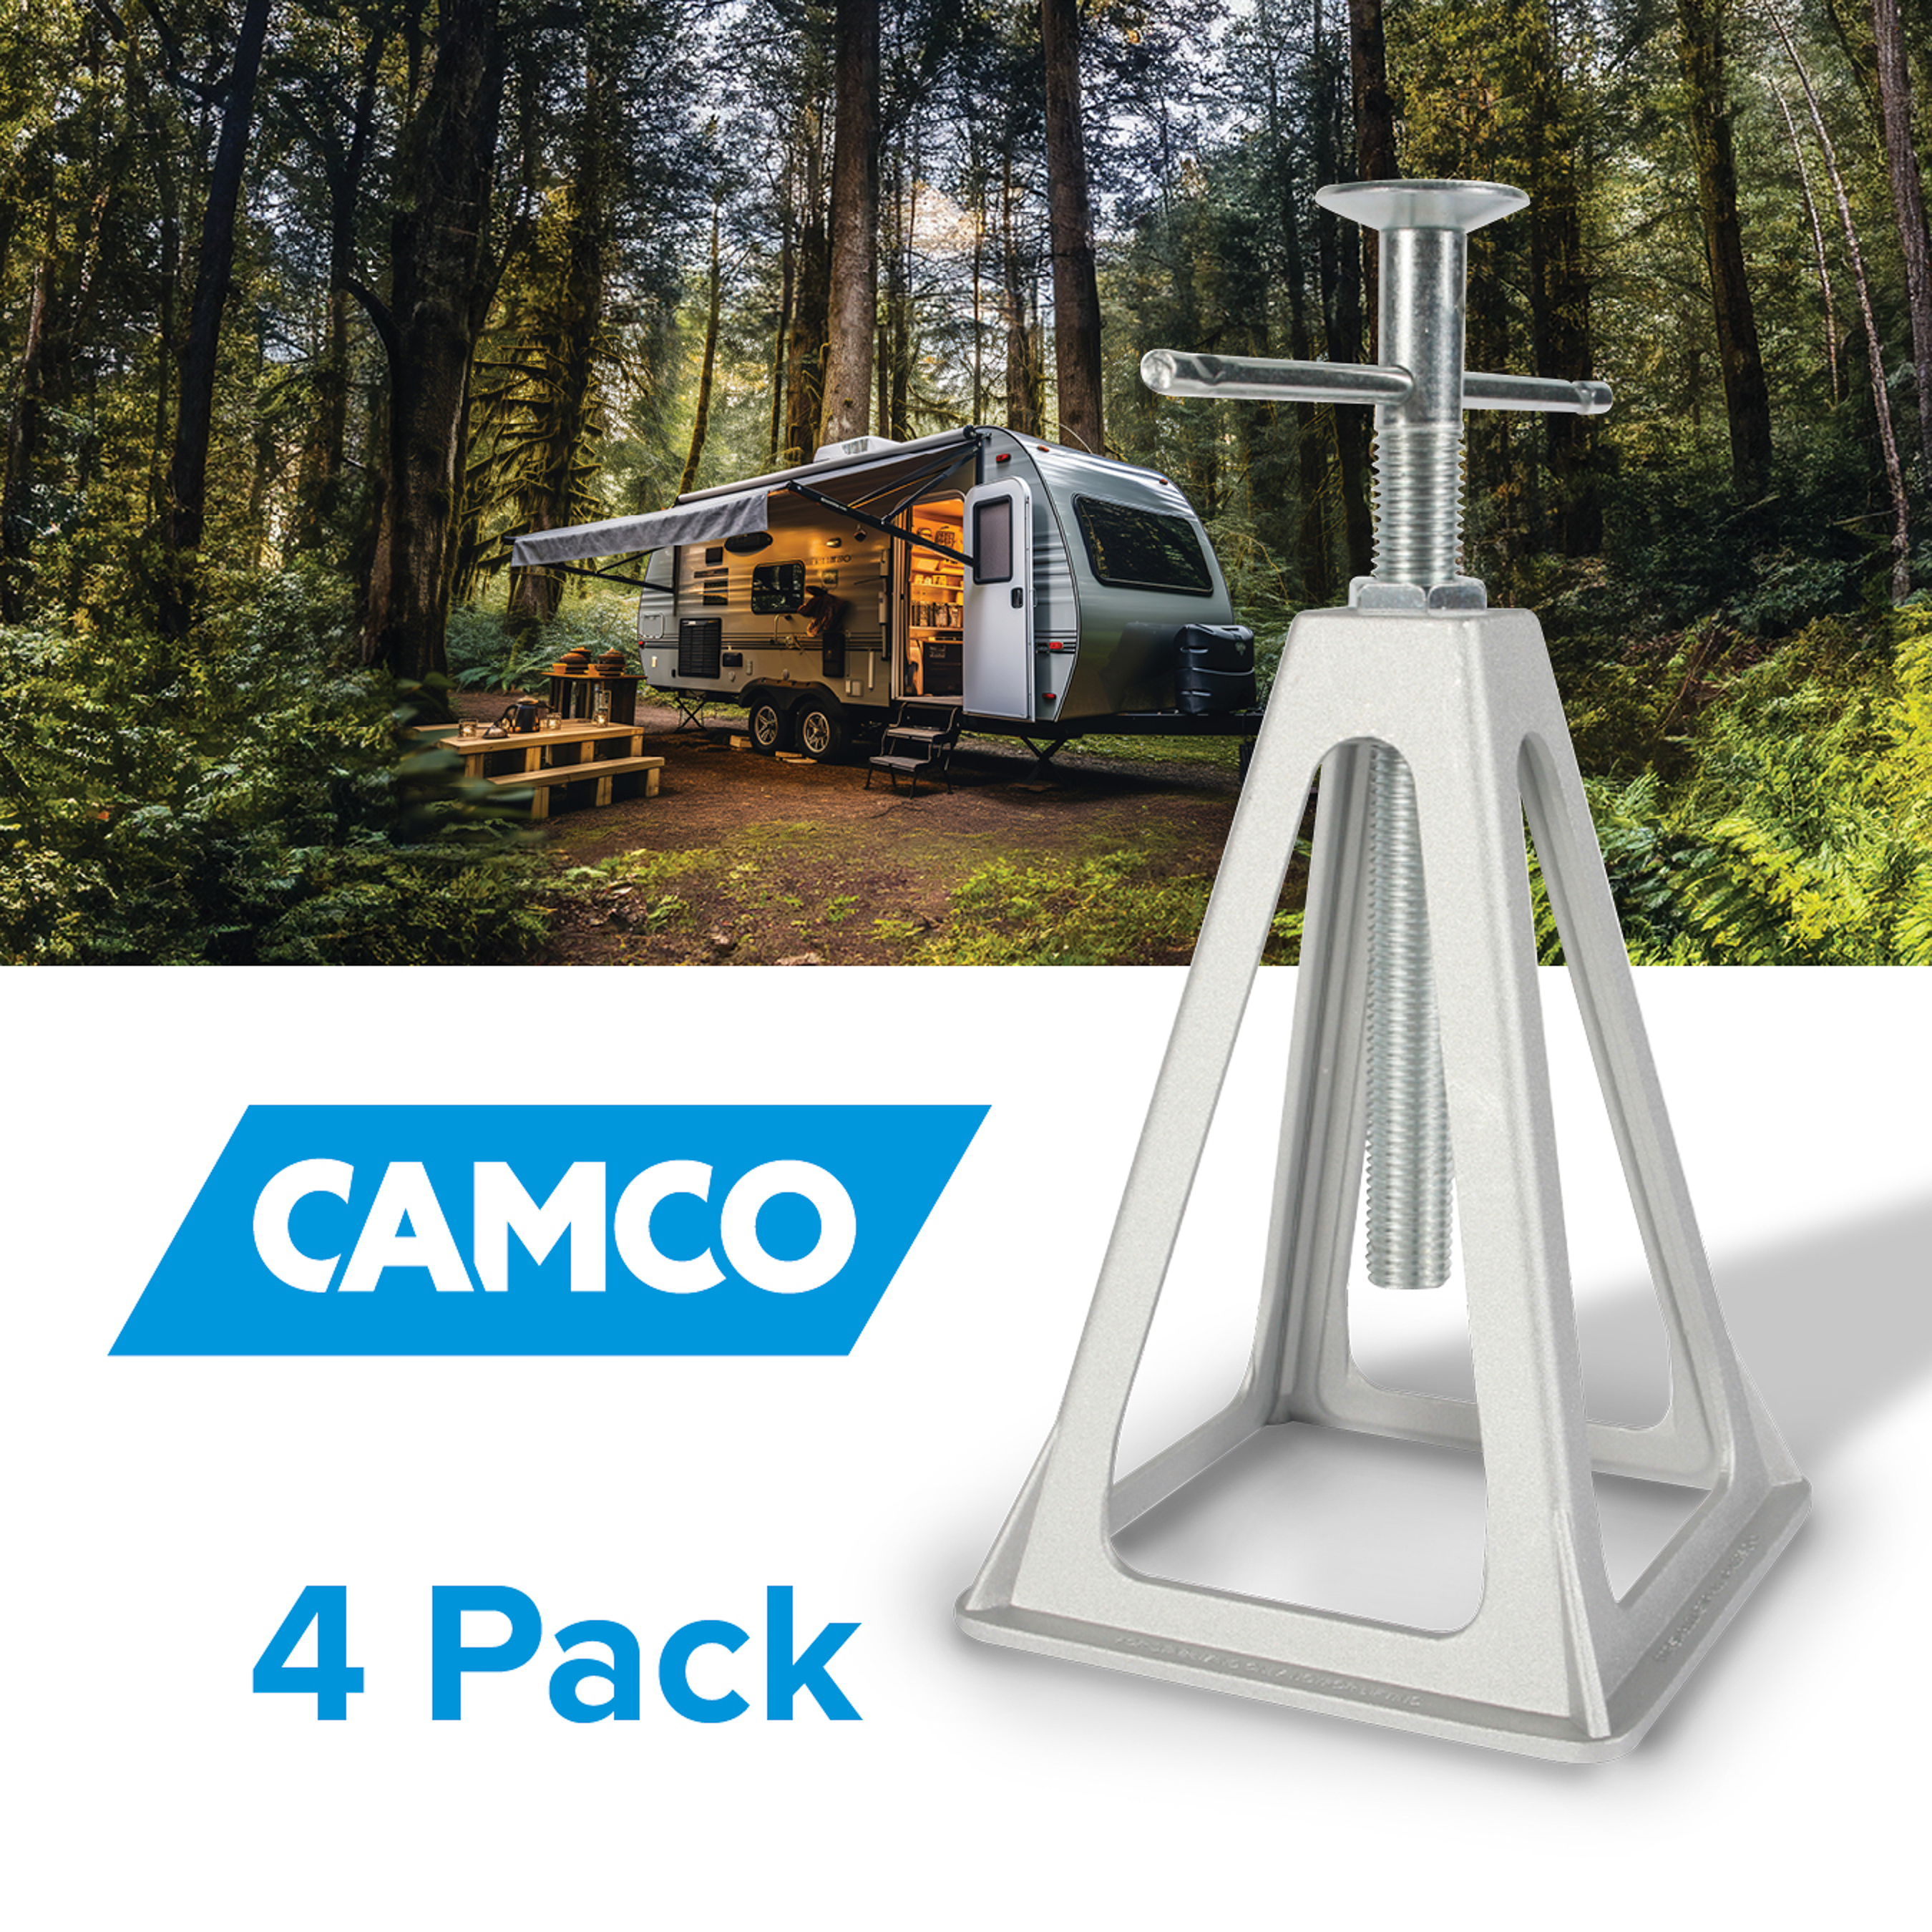 Camco RV Aluminum Stack Jacks - Size 11-inches to 17-inches - Silver, Pack of 4 (44560) - image 2 of 6